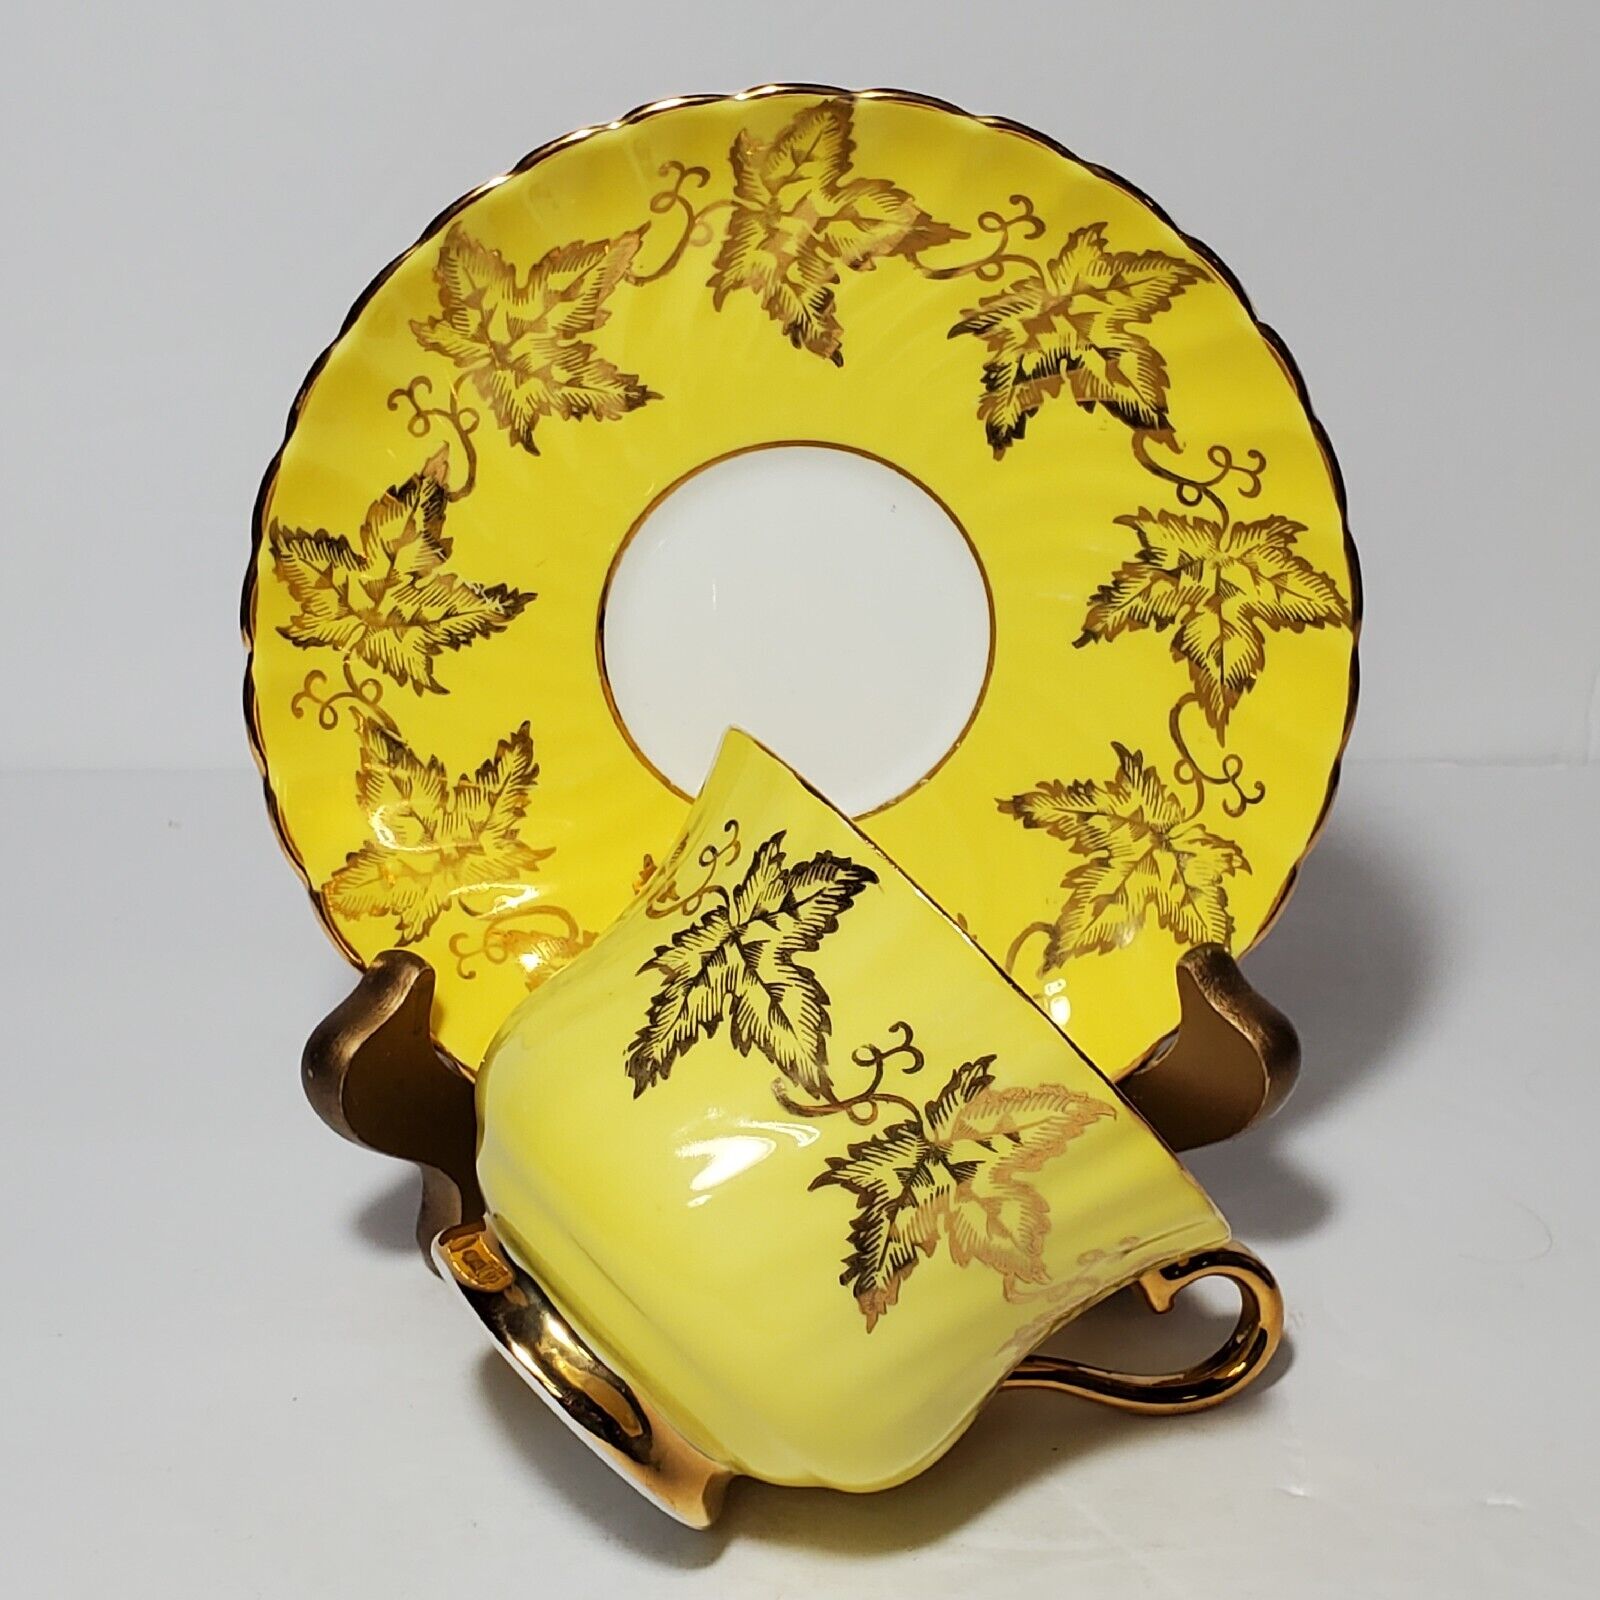 Sutherland H&M Teacup and Saucer Yellow Gold Leaves Bone China England Vintage